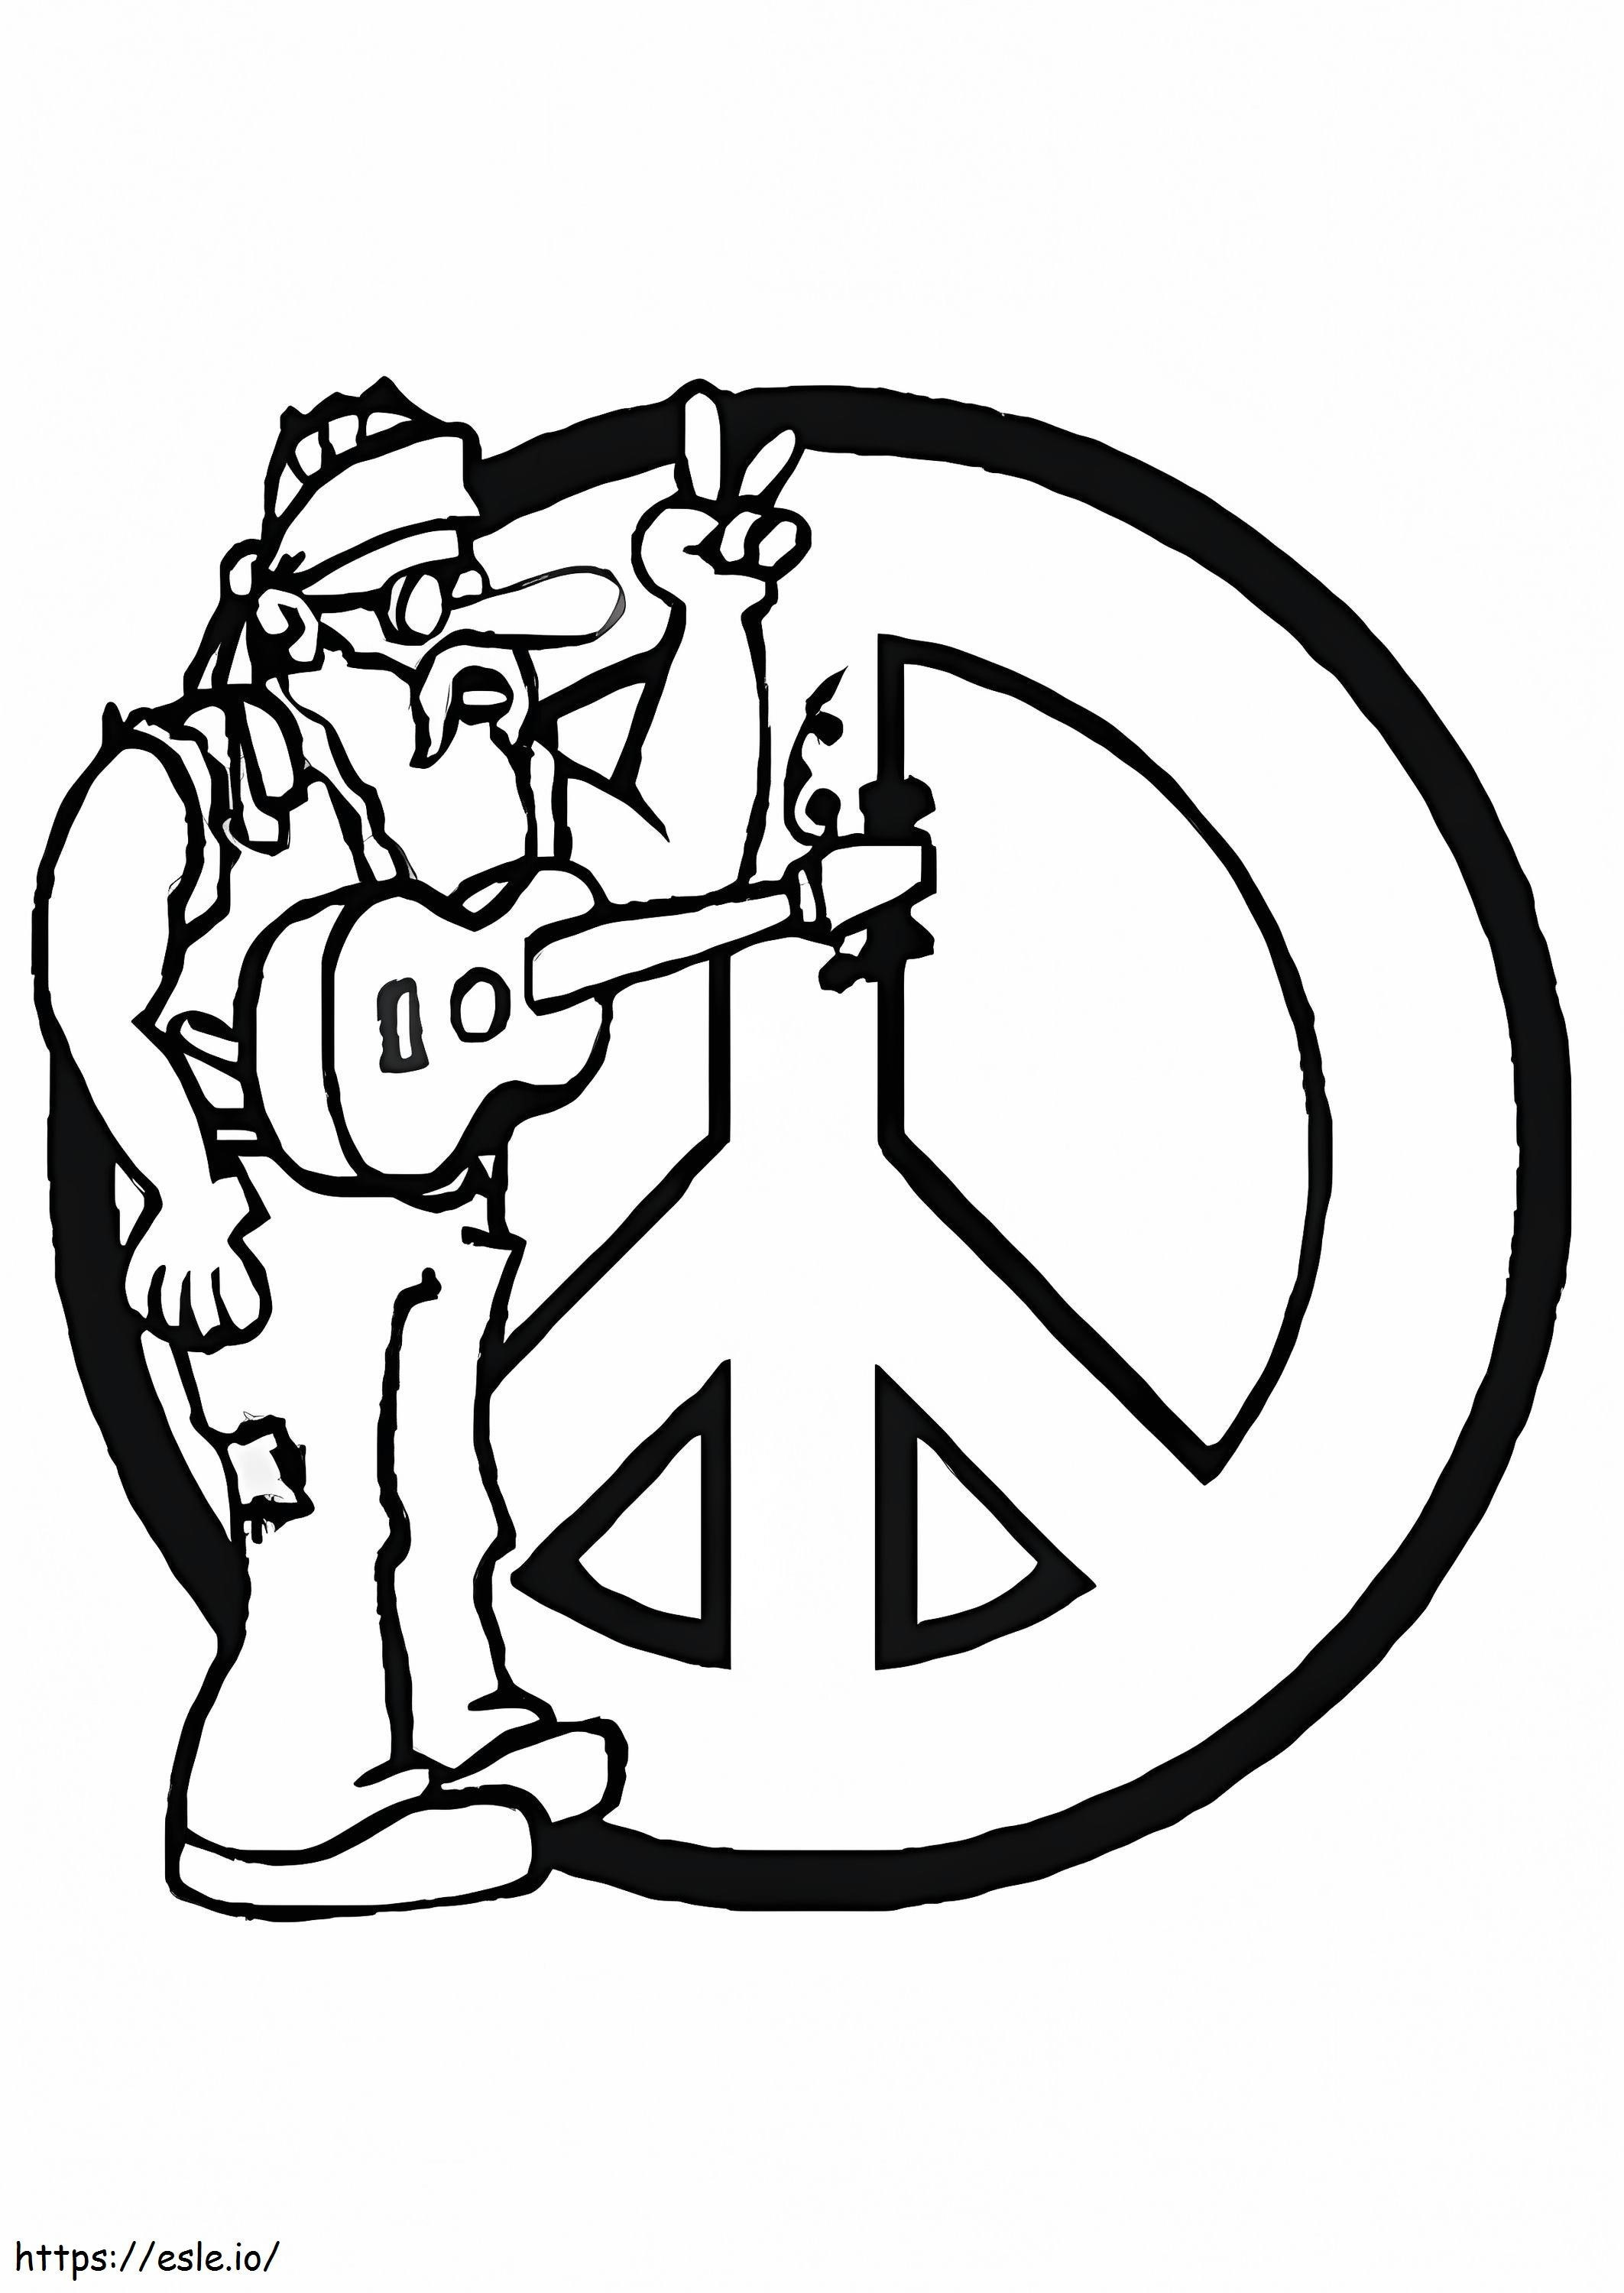 Hippy Man Peace coloring page